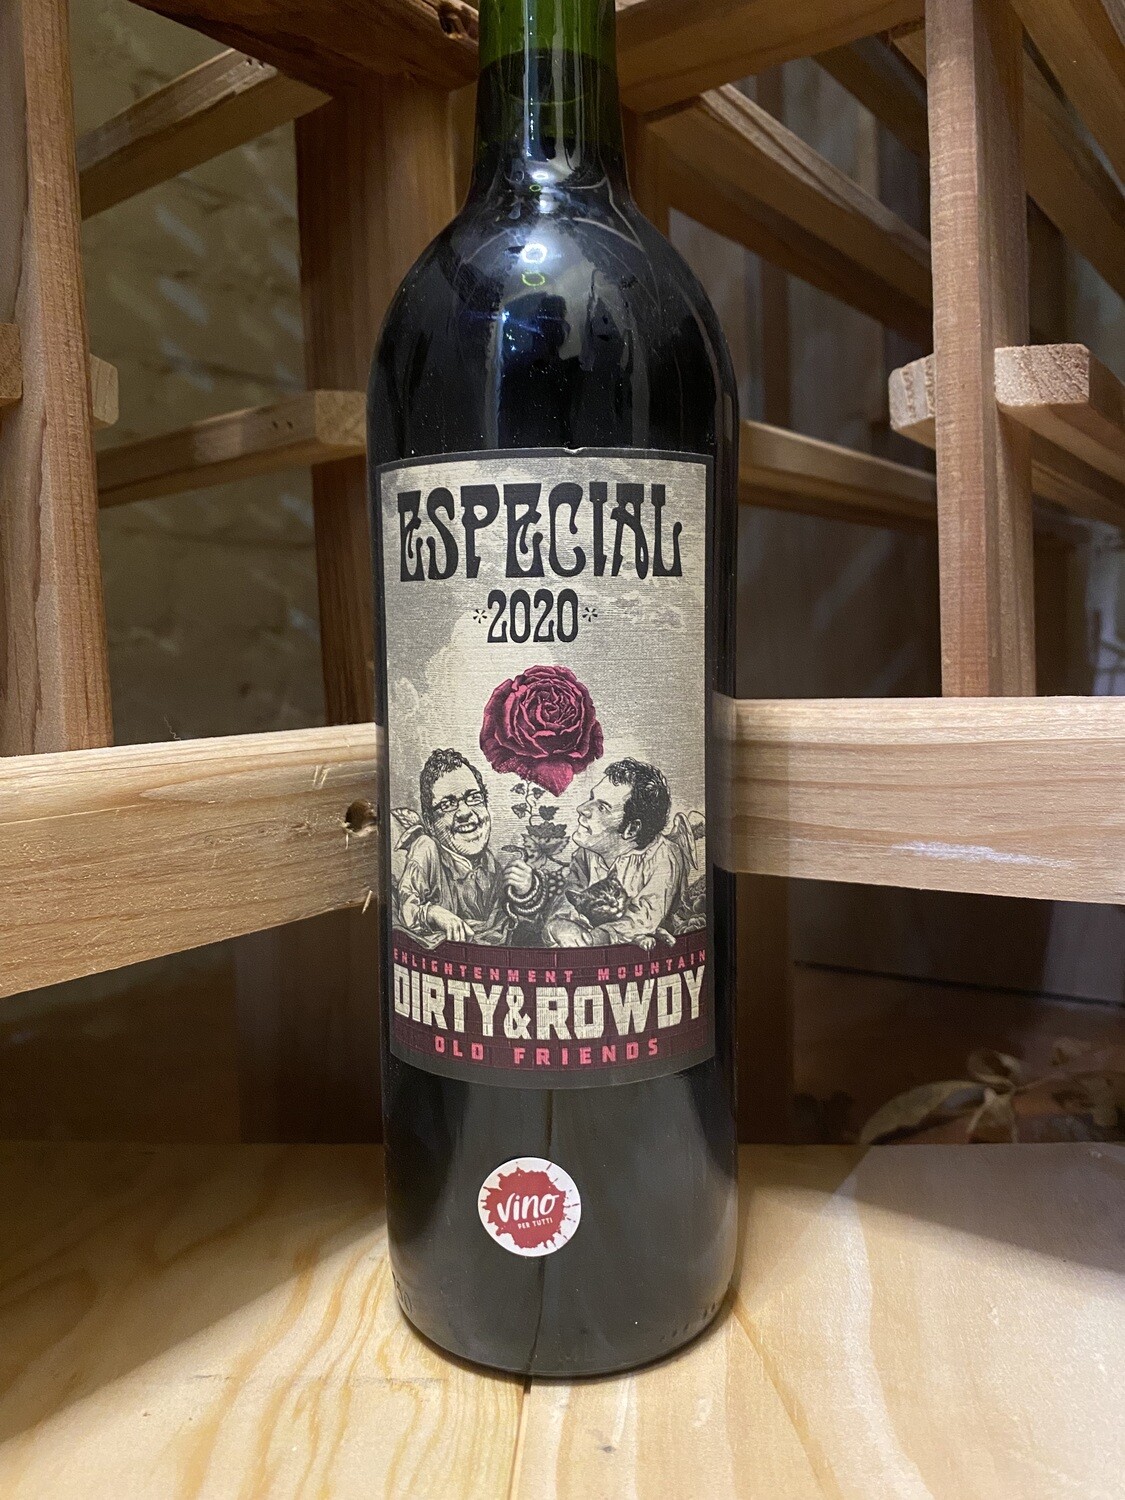 Dirty & Rowdy "Especial Old Friends" Old Vine Red 2020